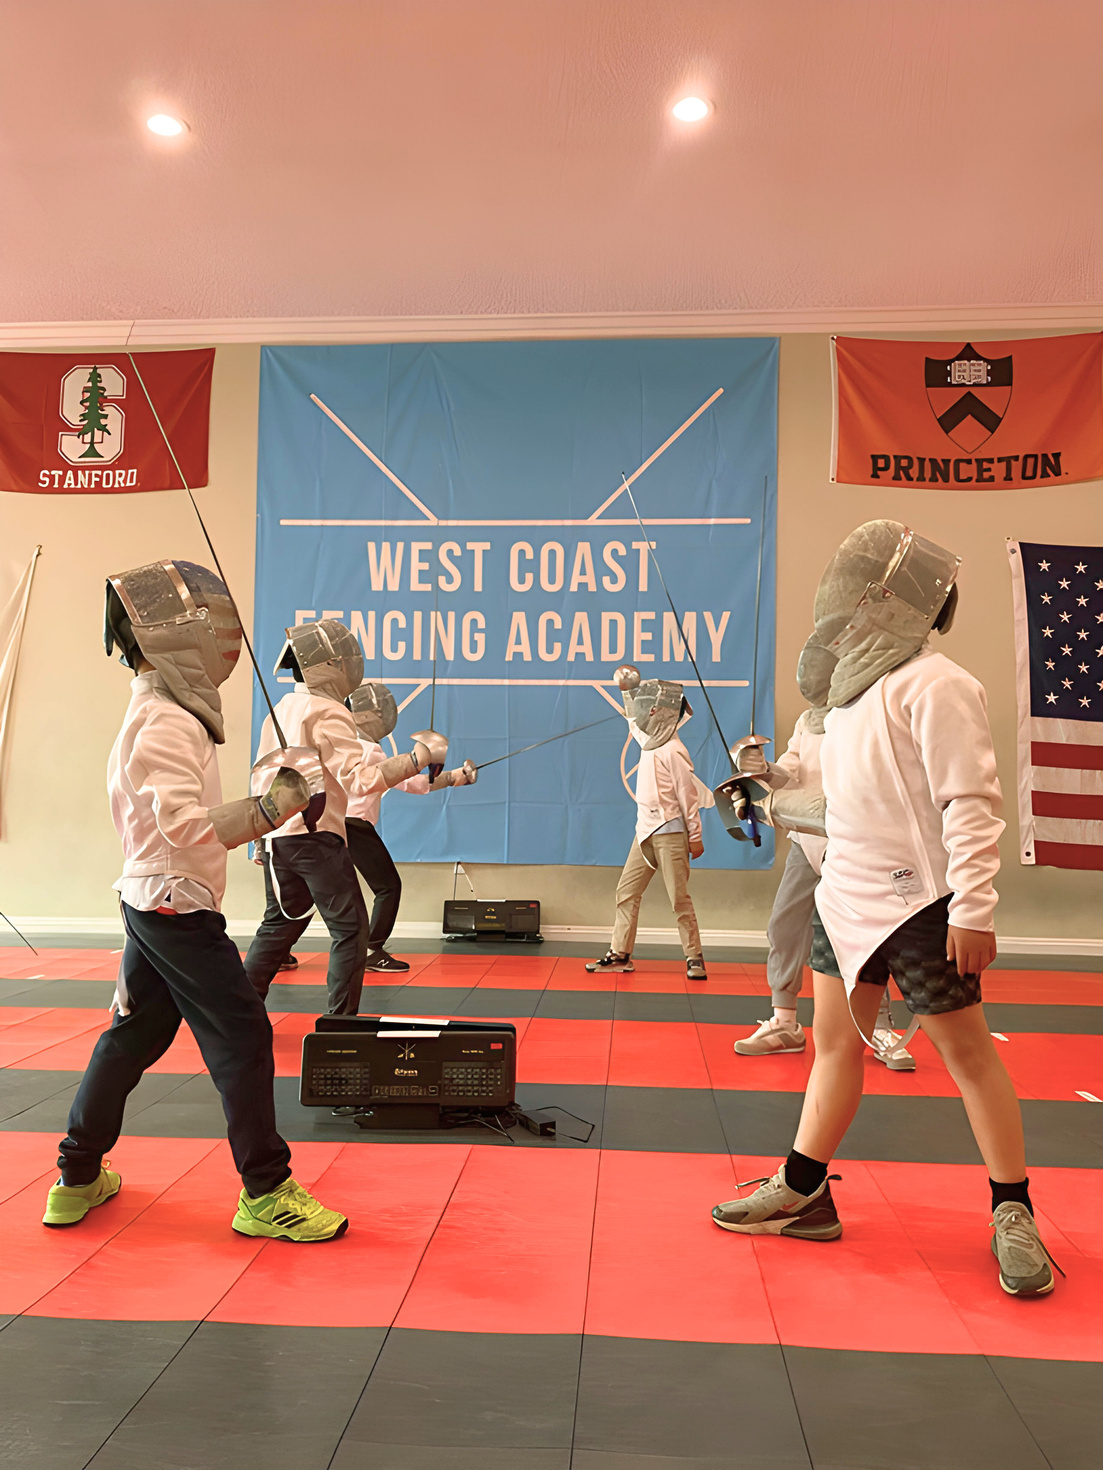 A group of young saber fencing in saber fencing gear with mask, gloves and saber practicing saber fencing drills at West Coast Fencing Academy in the Advance Youth Class.